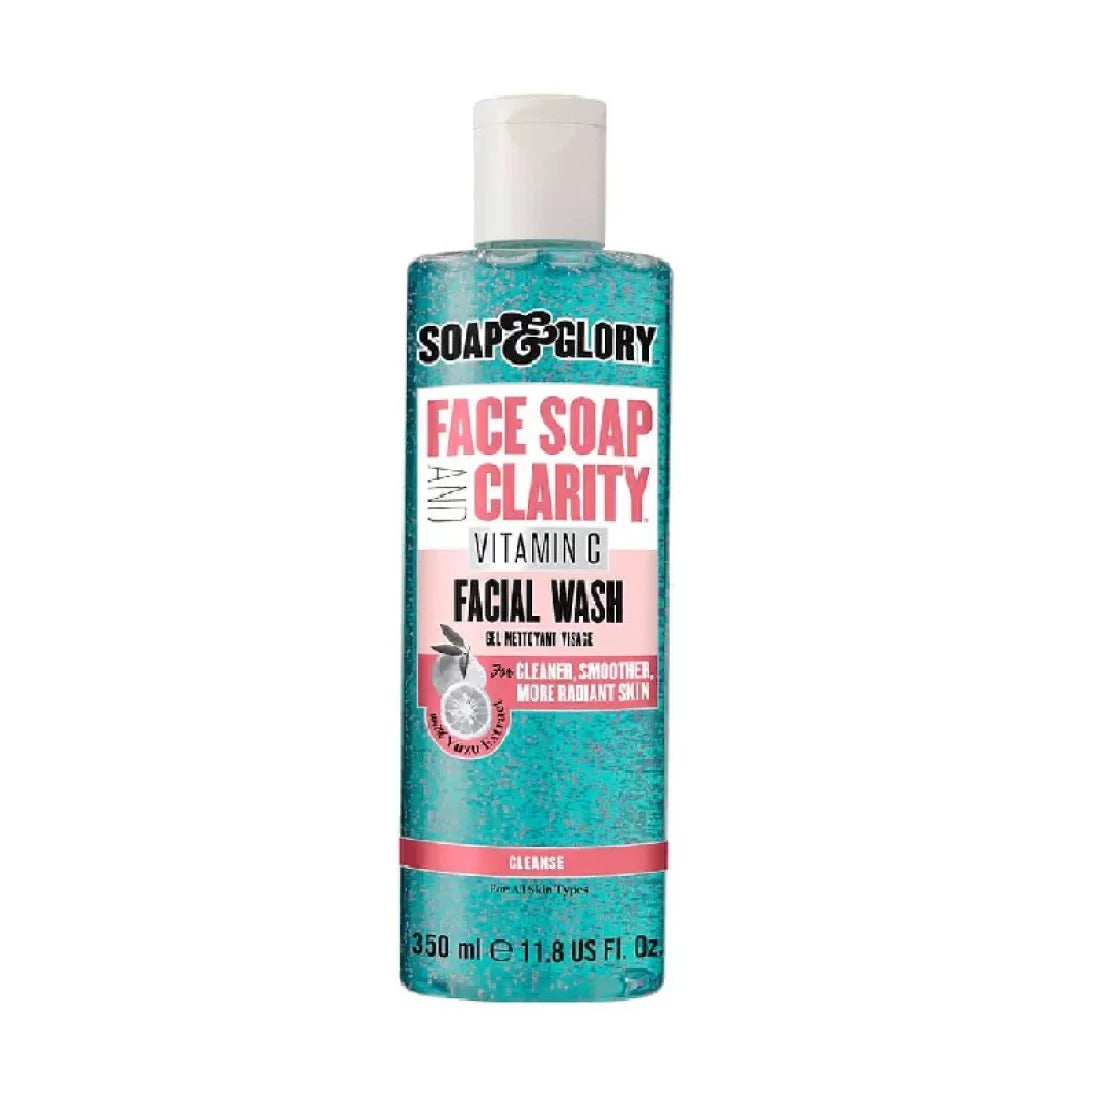 Soap & Glory Face Soap & Clarity 3 in 1 Daily Vitamin C Facial Wash